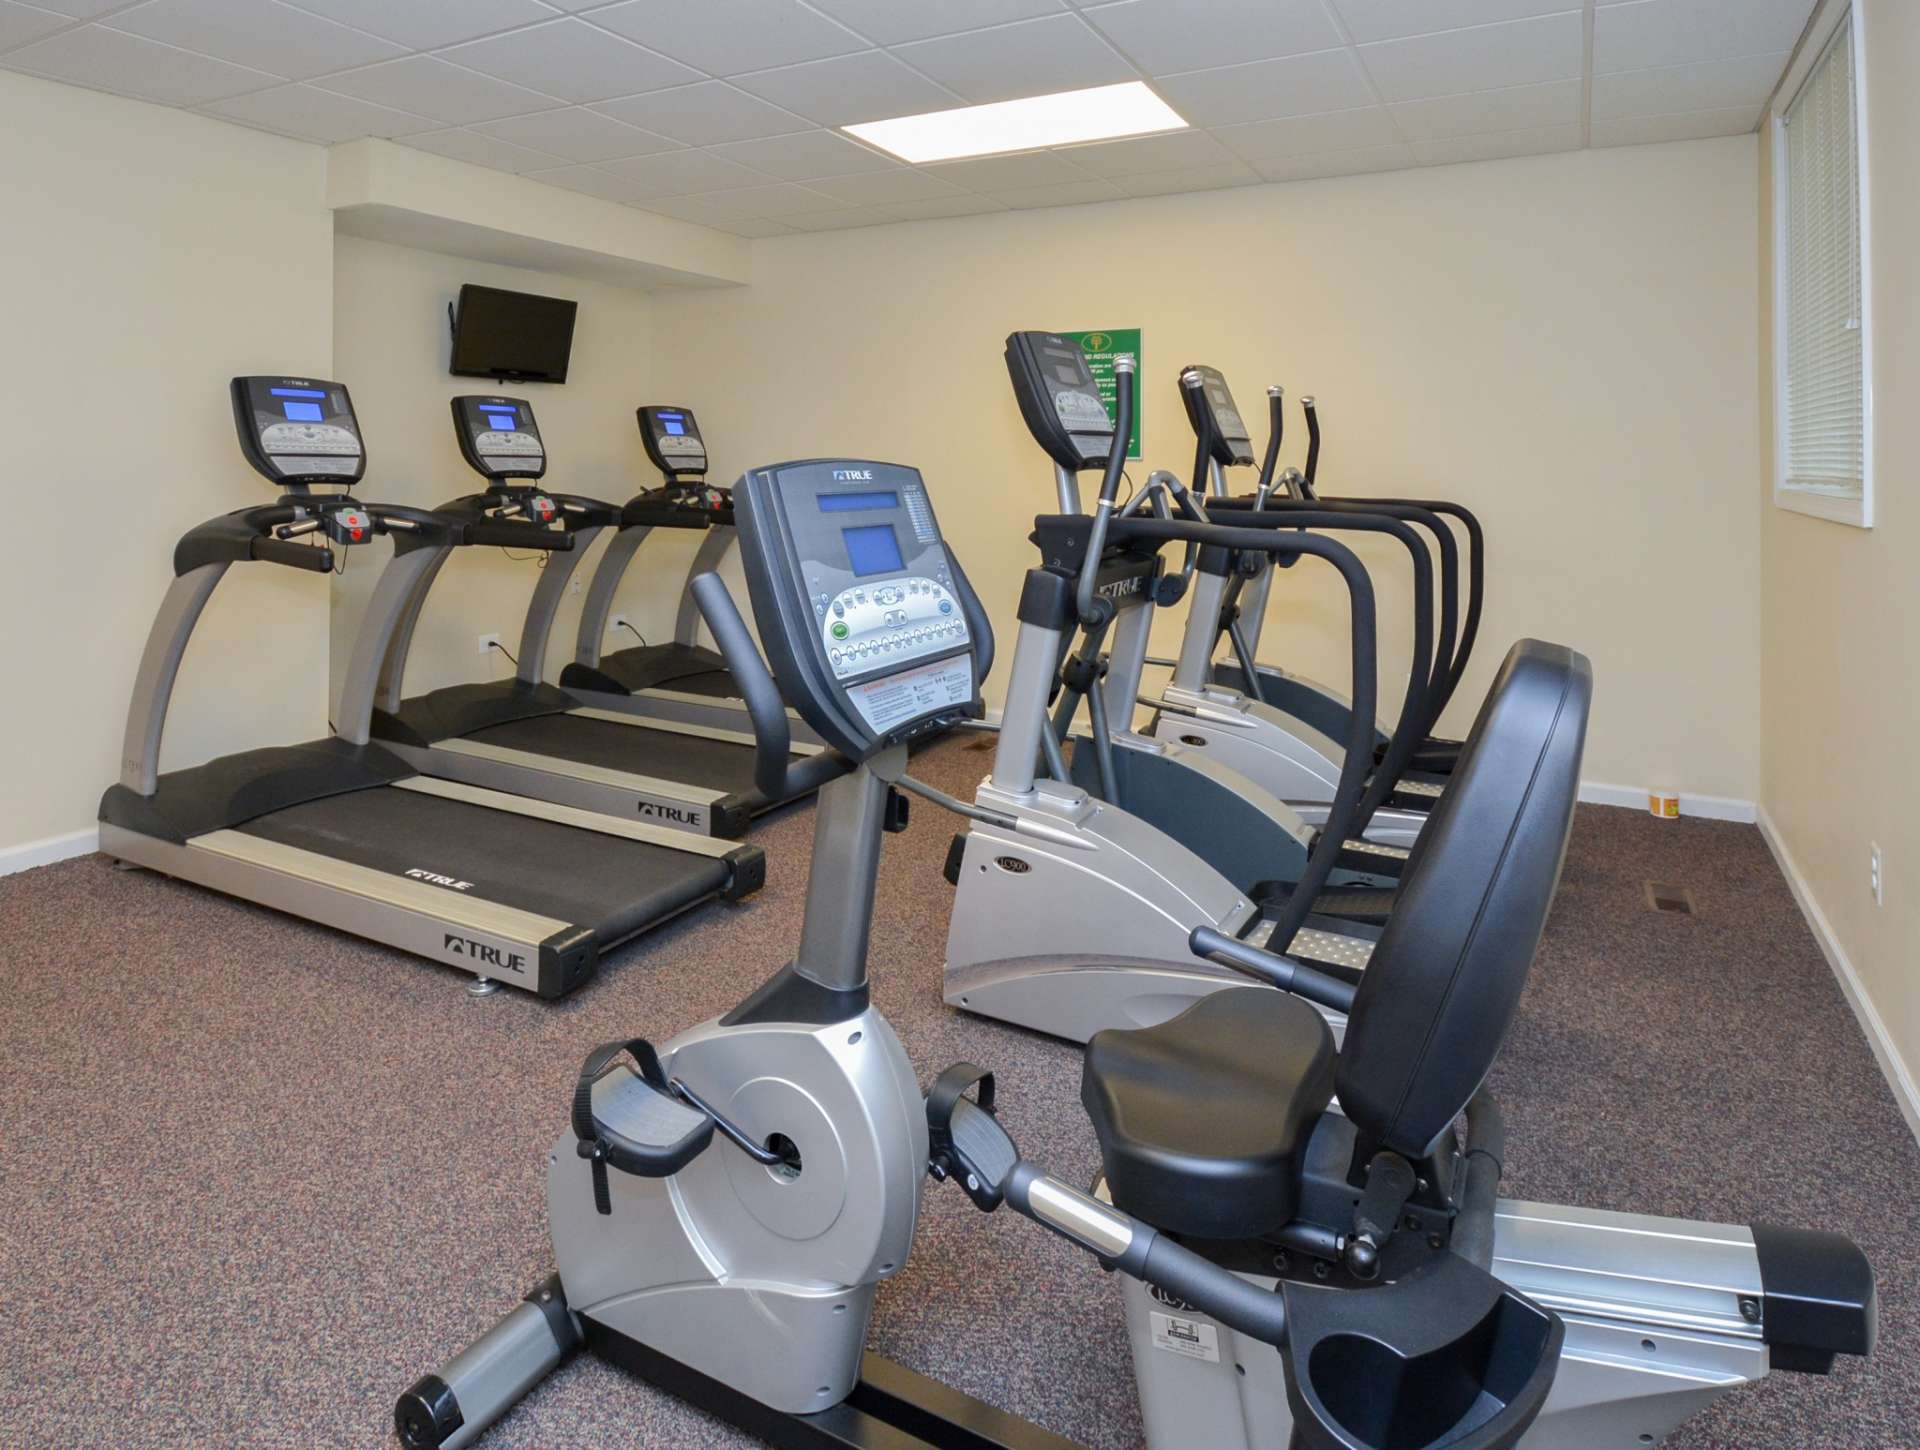 Indoor gym with a variety of workout equipment for residents at Lansdowne Towers.